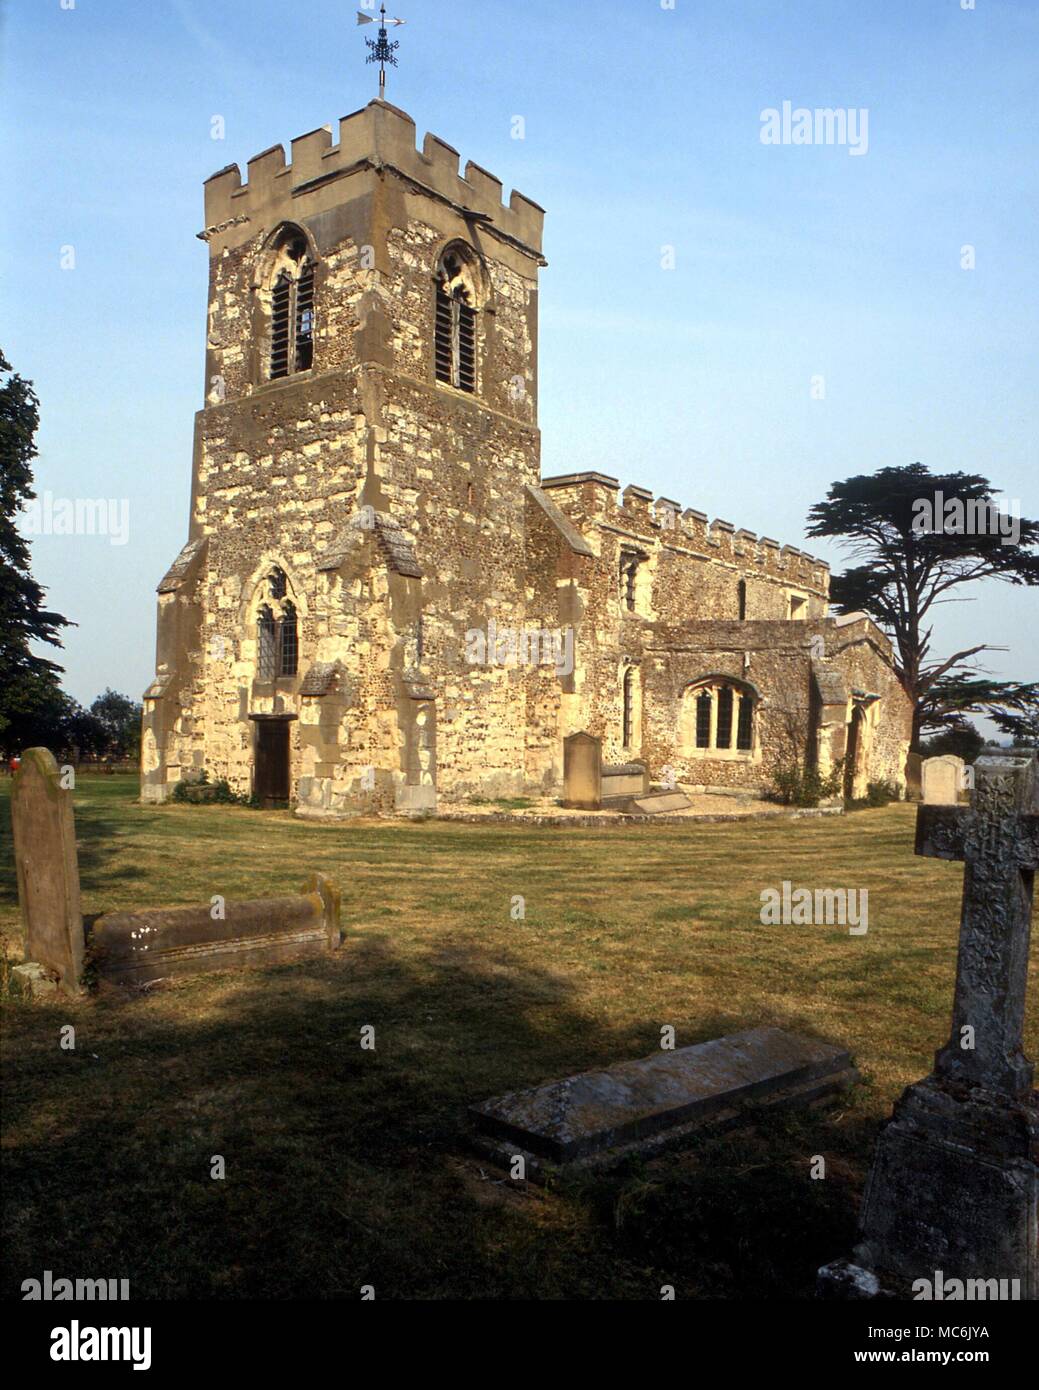 WITCHCRAFT - Hinxworth parish church, where the family tomb of the infamous 16th century beauty and witch, Jane Shore, is located (brasses in choir nave) Stock Photo